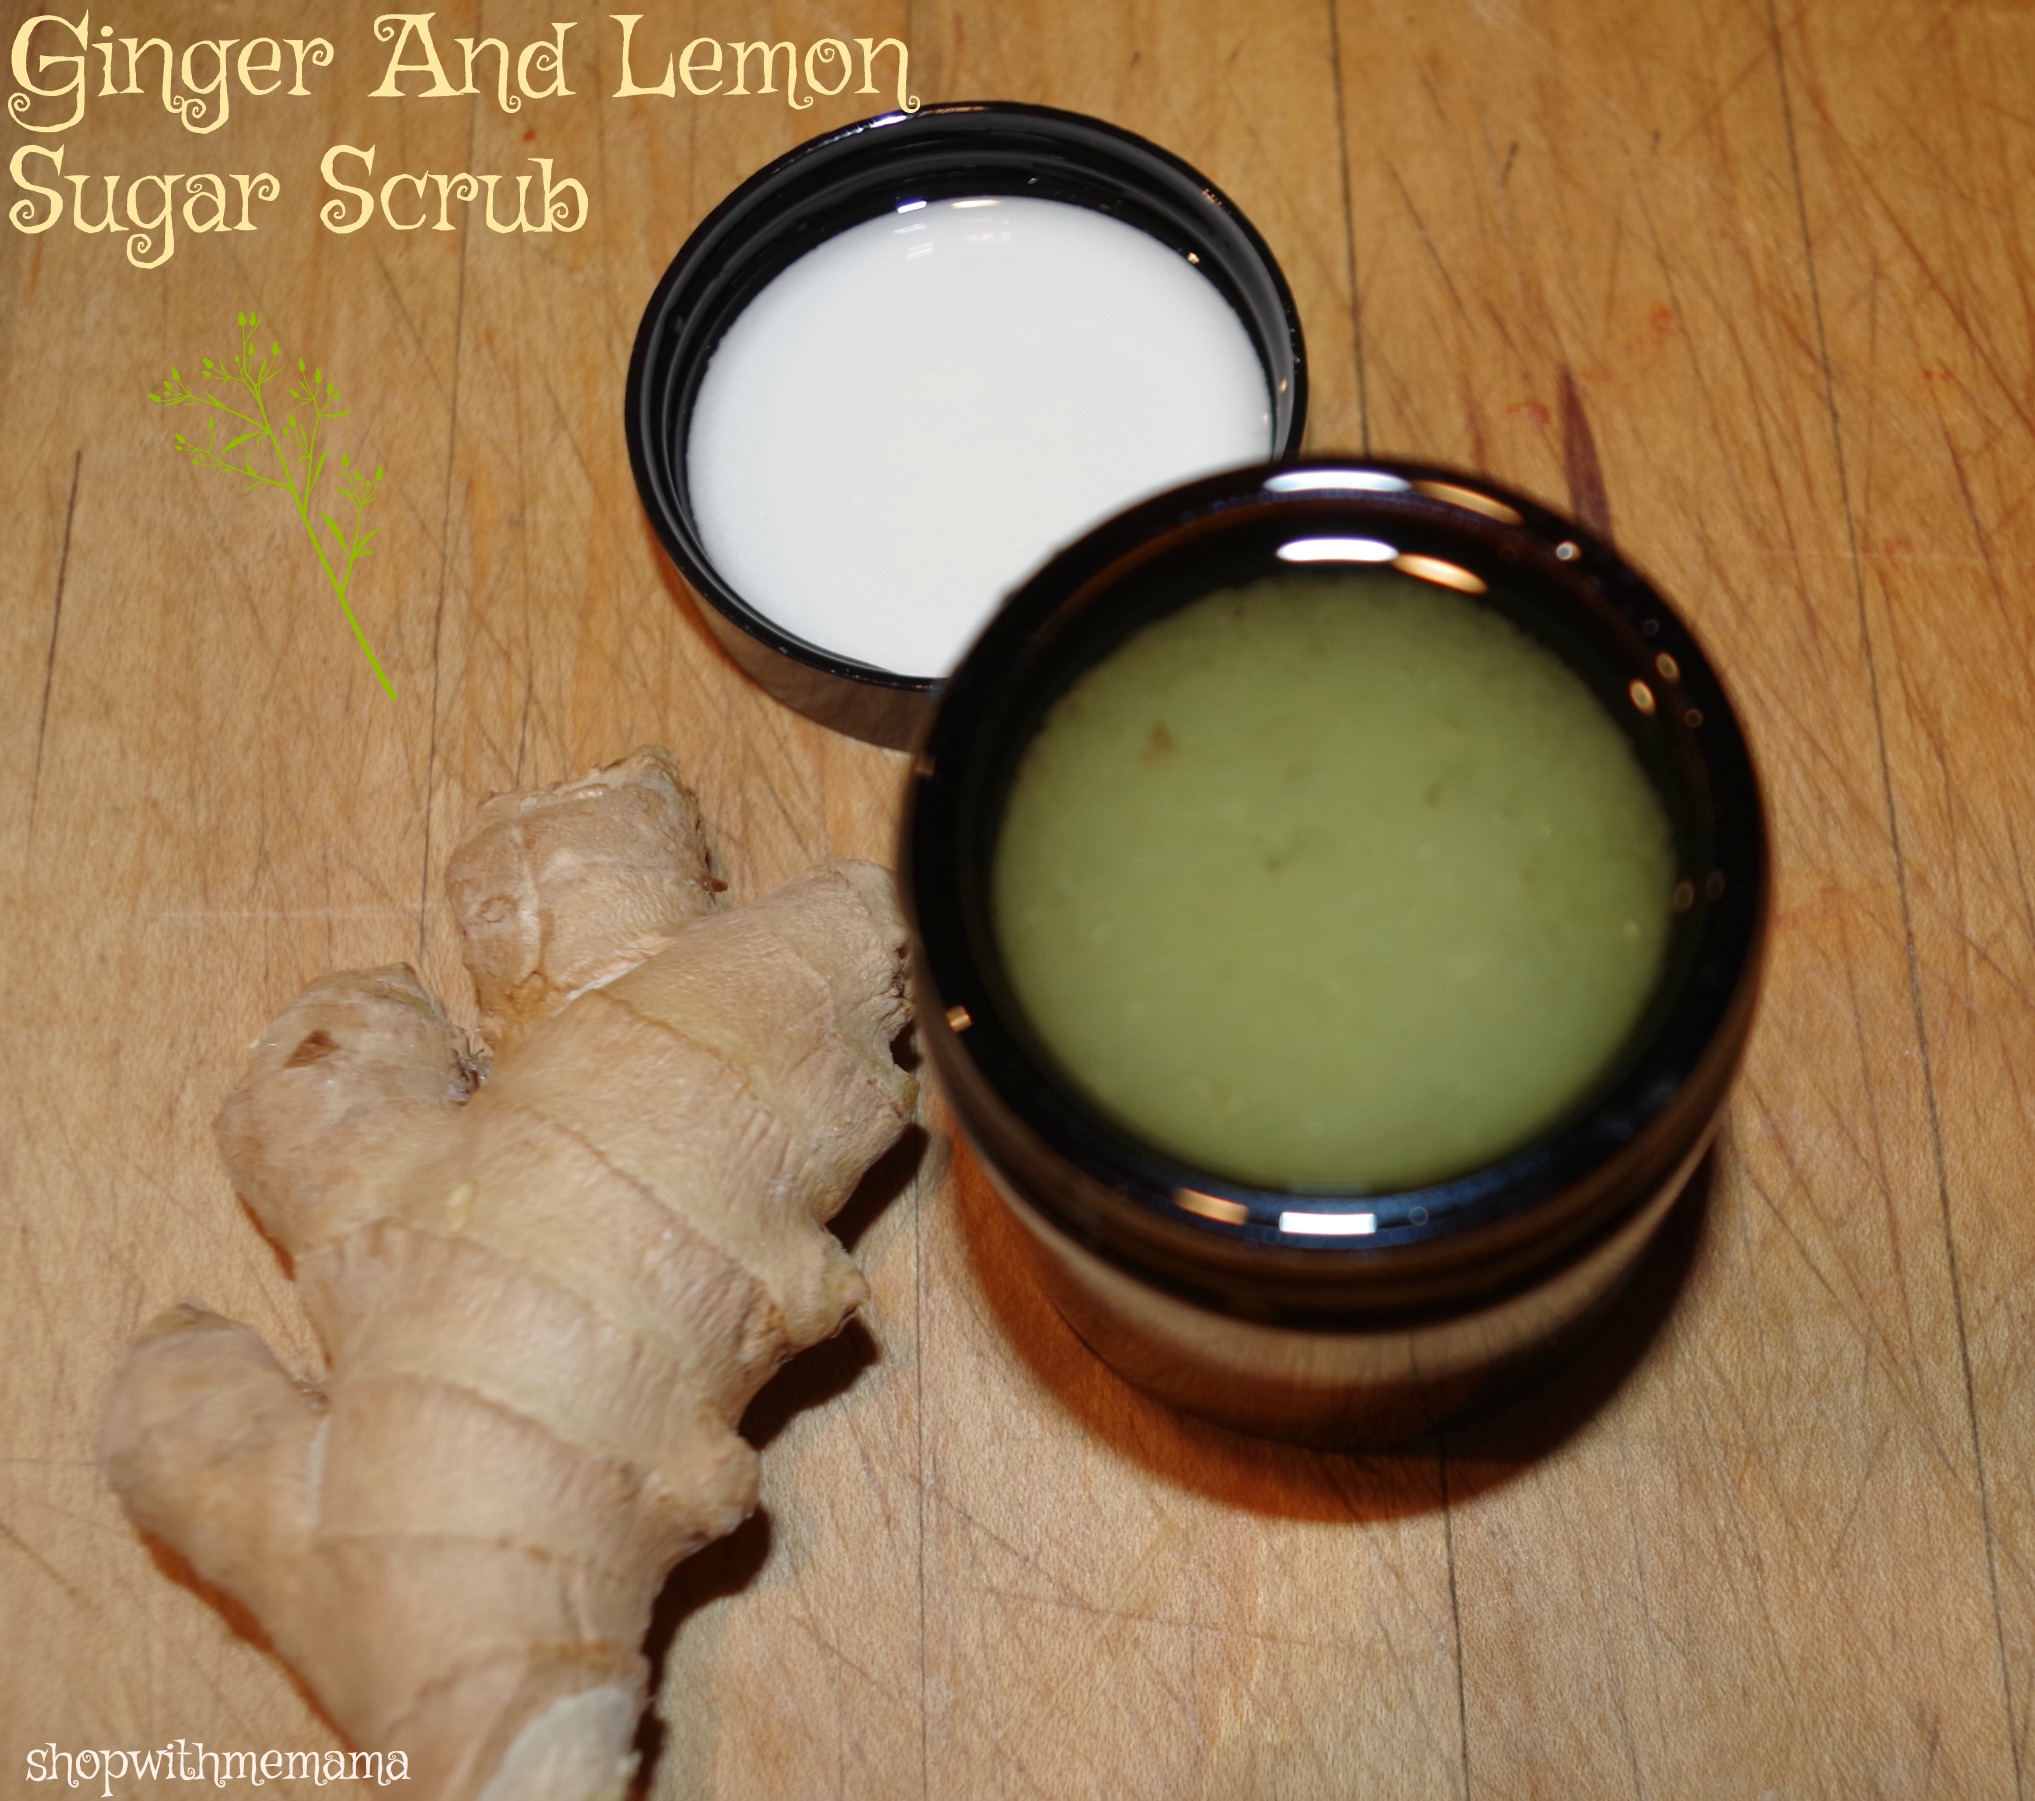 5 Steps To Making Your Own Ginger And Lemon Sugar Scrub!